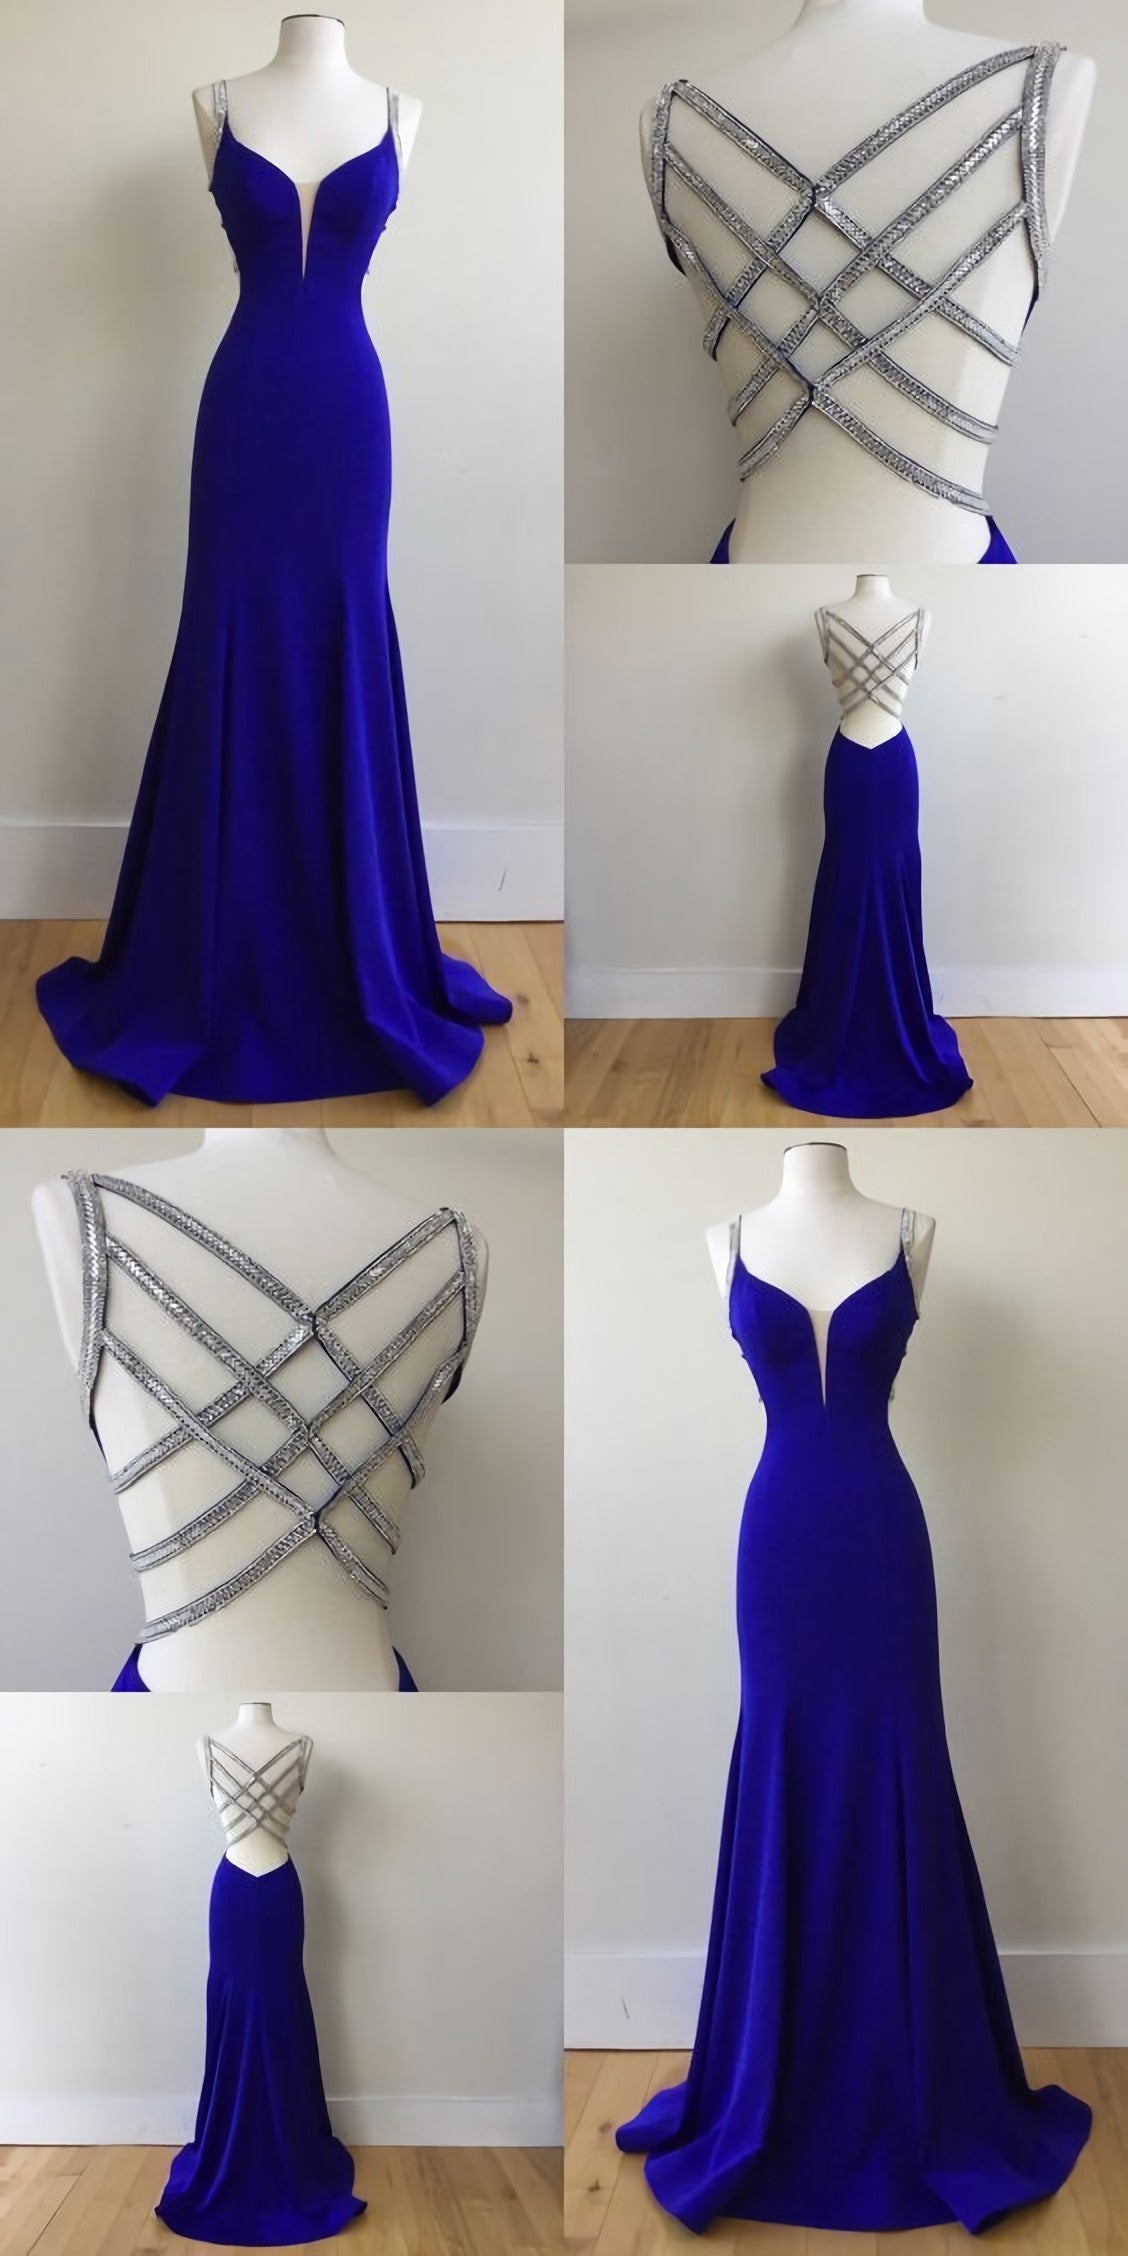 Prom Dress Classy, Royal Blue Prom Dress, For Teens Prom Dresses, Graduation School Party Gown